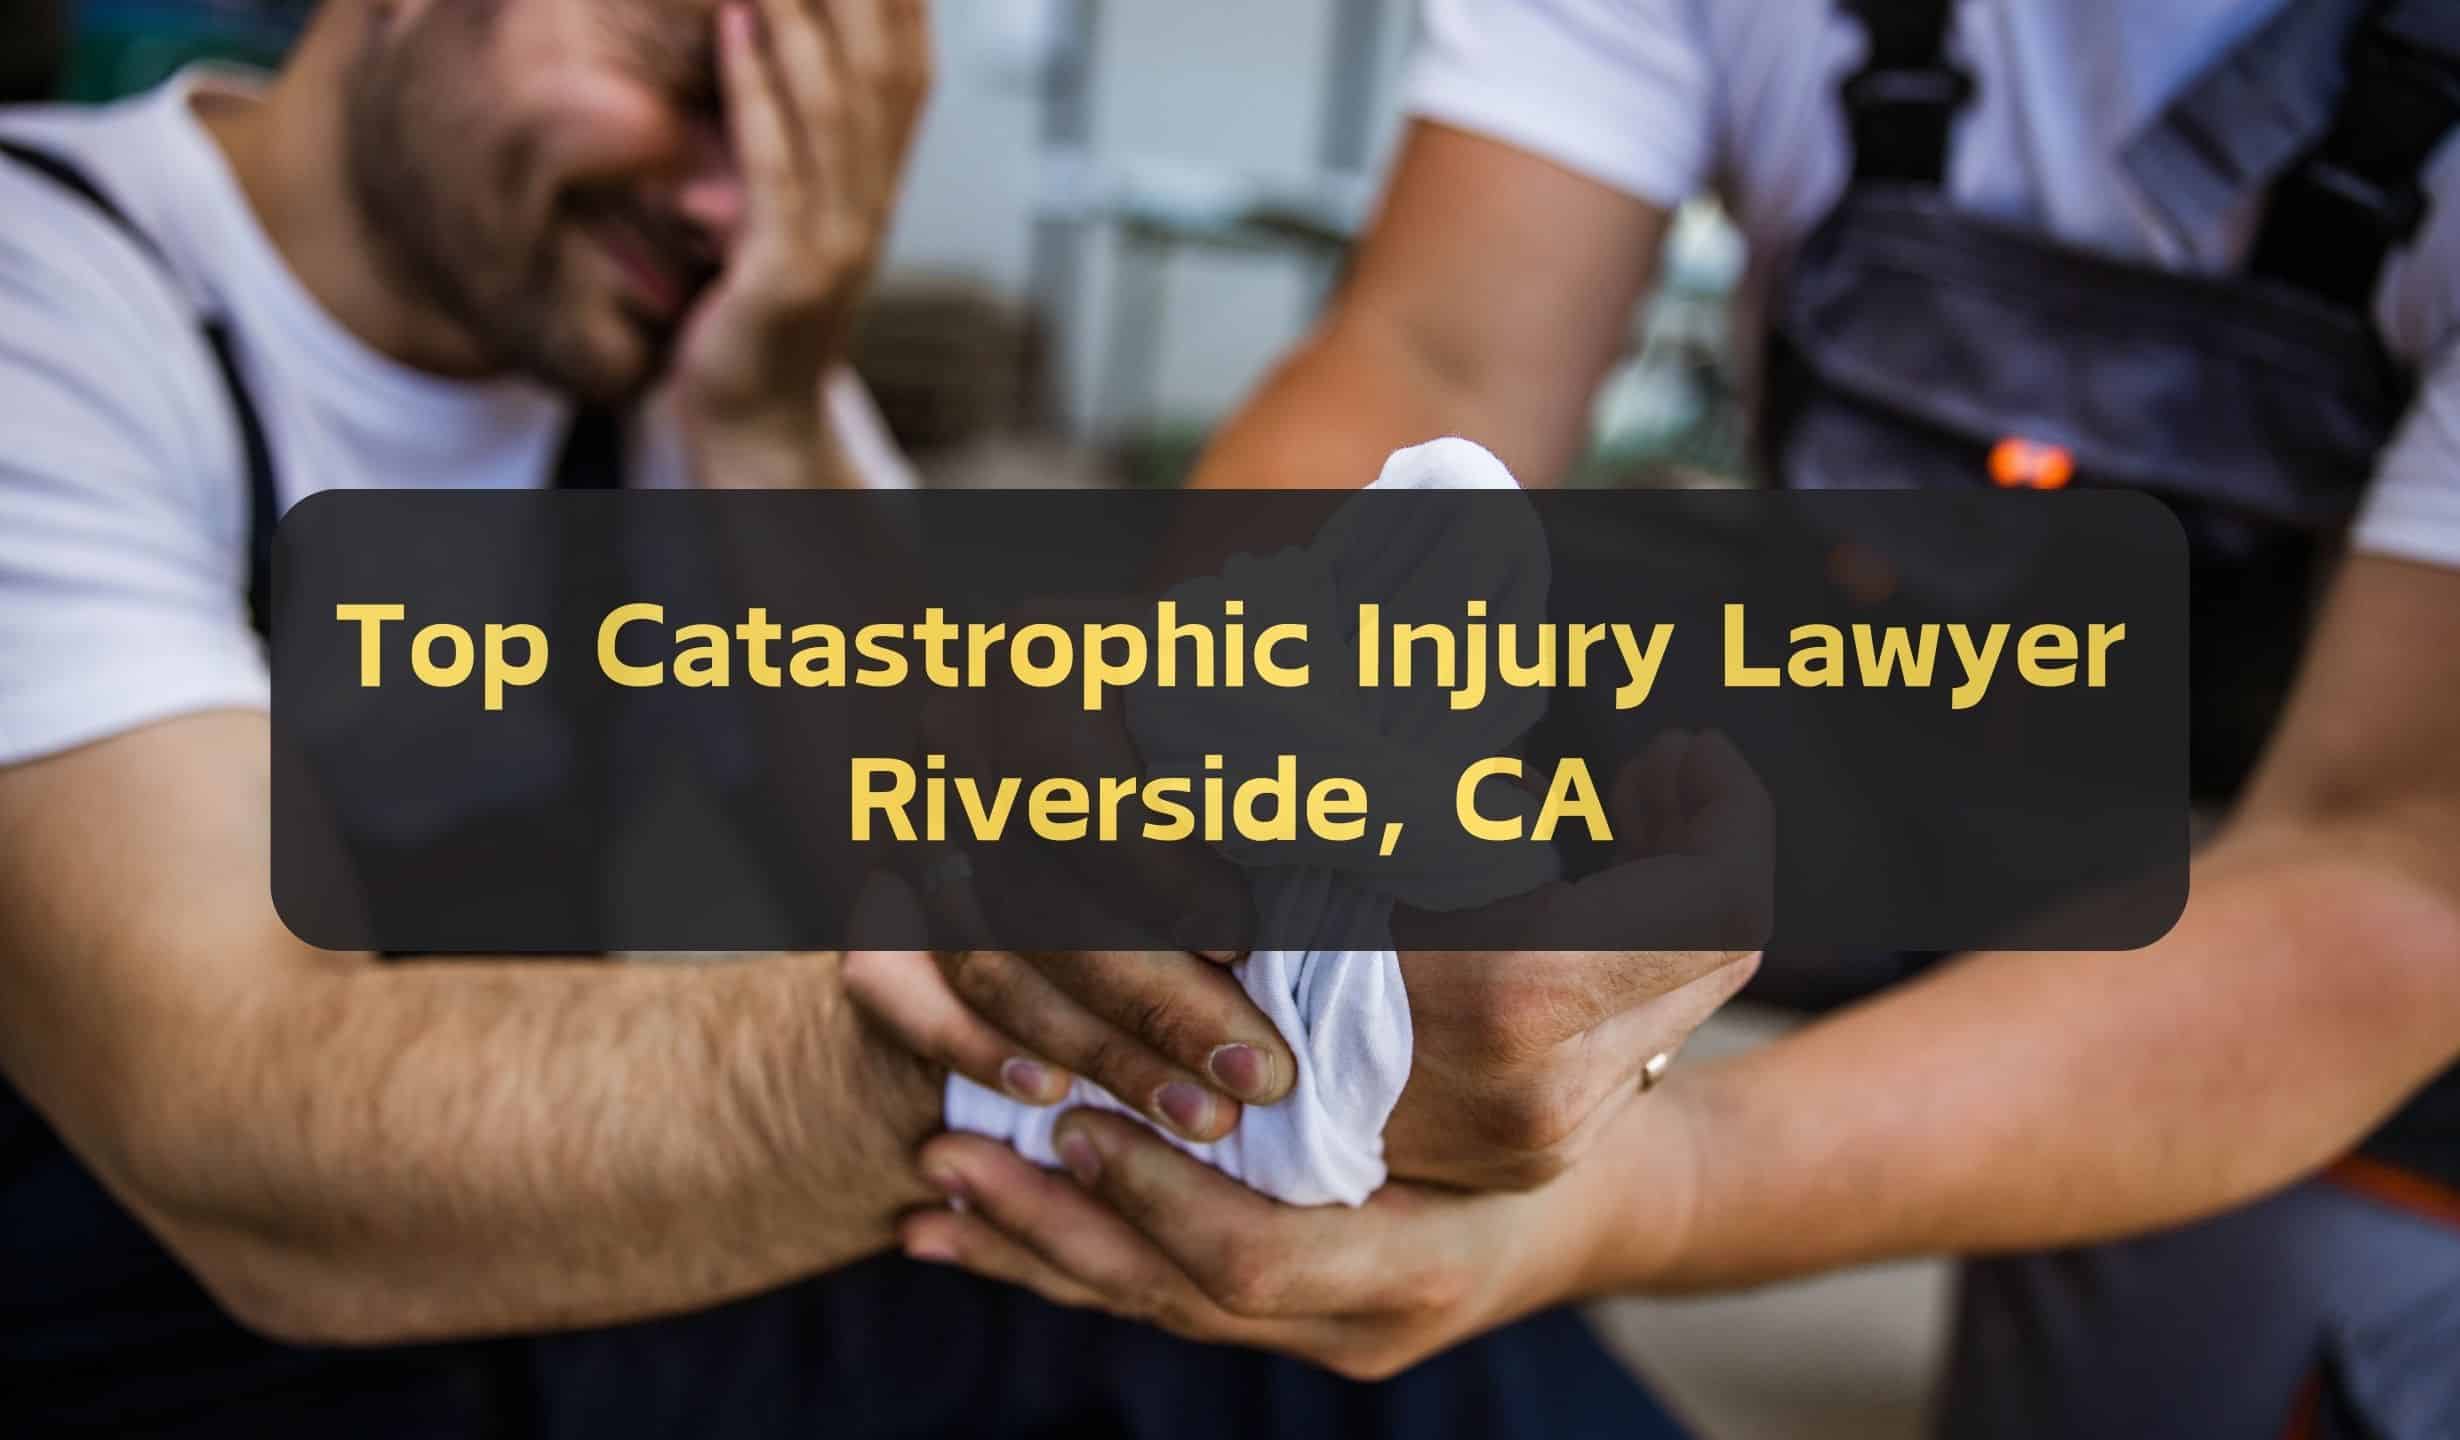 Top Catastrophic Injury Lawyer Riverside